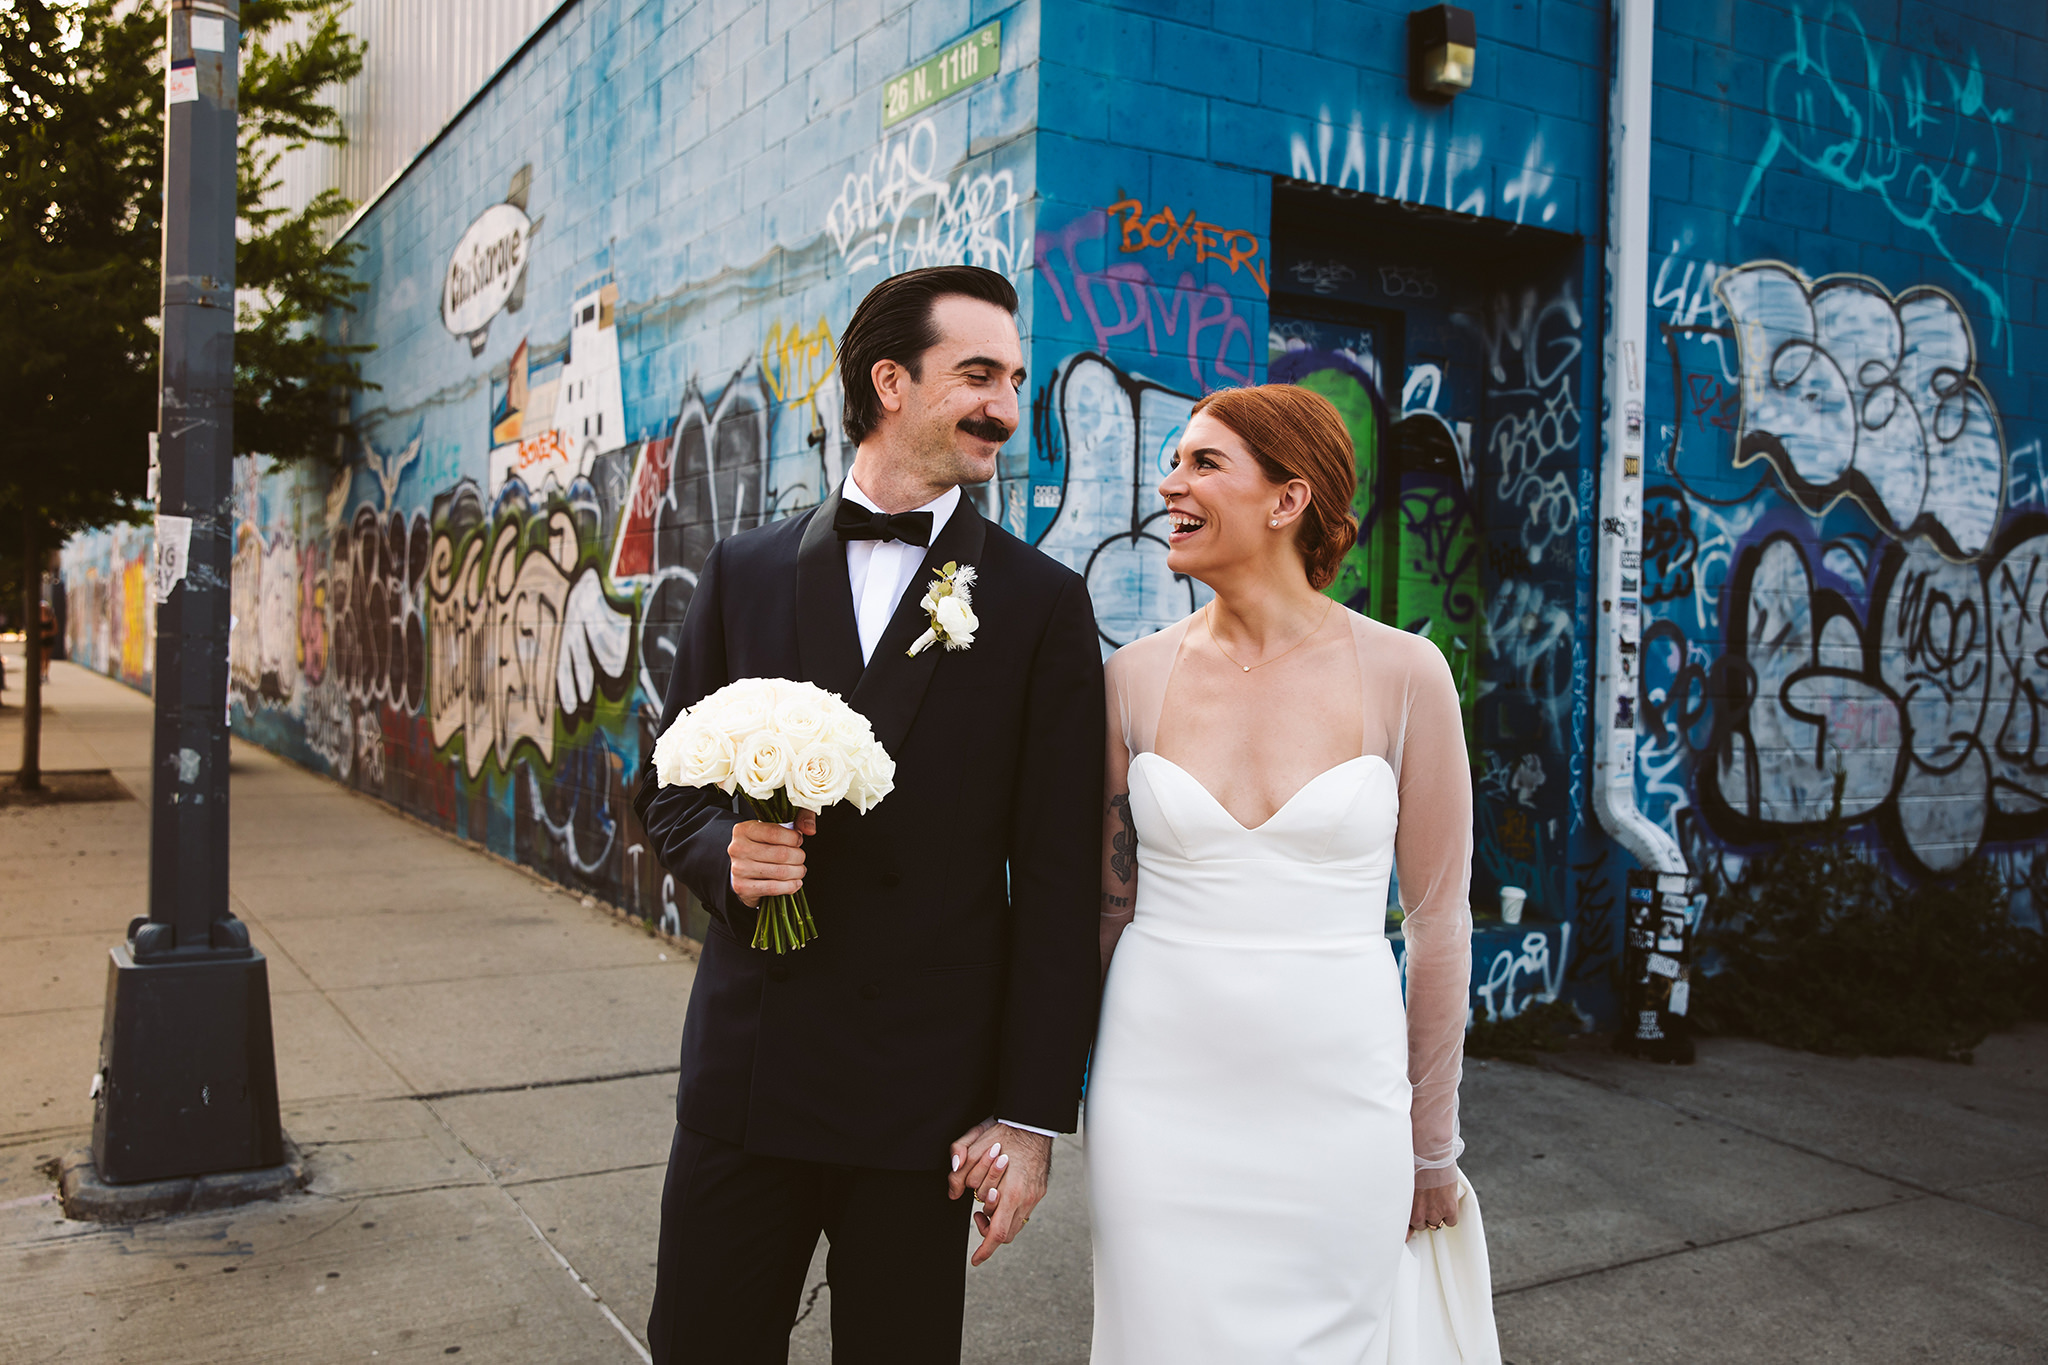 A wedding photo with street art and graffiti in the background in Brooklyn, New York